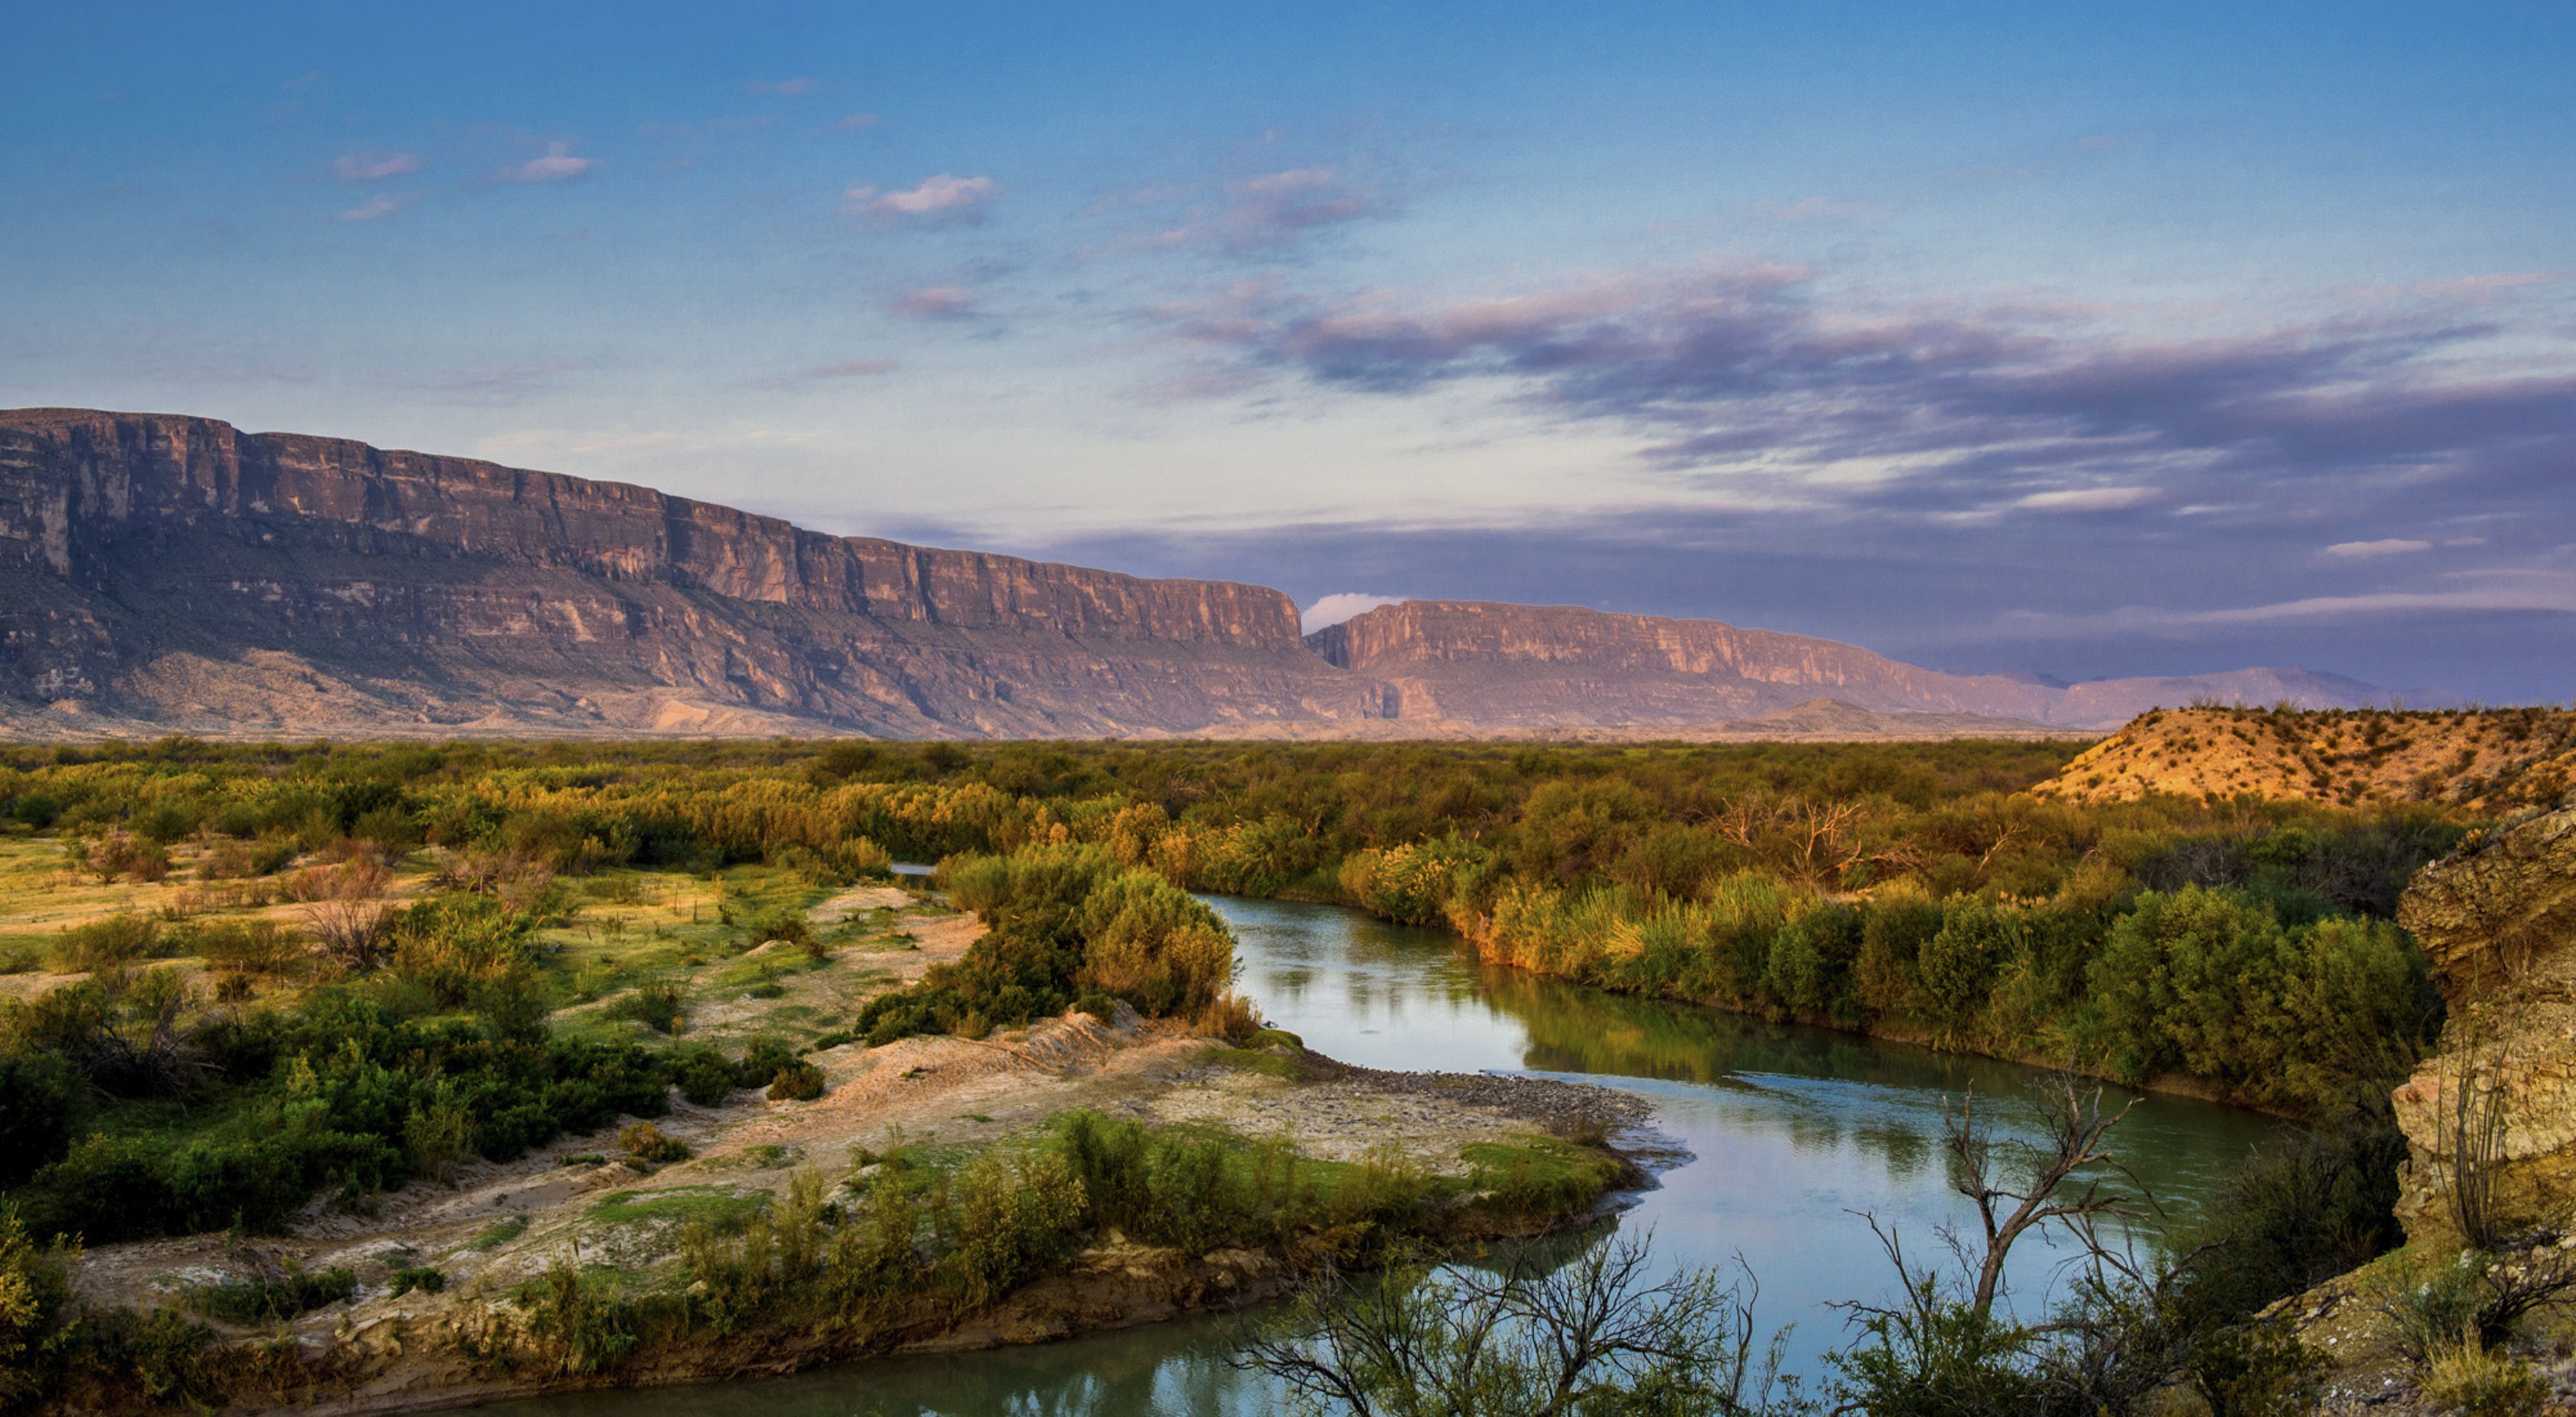 Sweeping view of the Rio Grande against rocky mountains in arid West Texas.